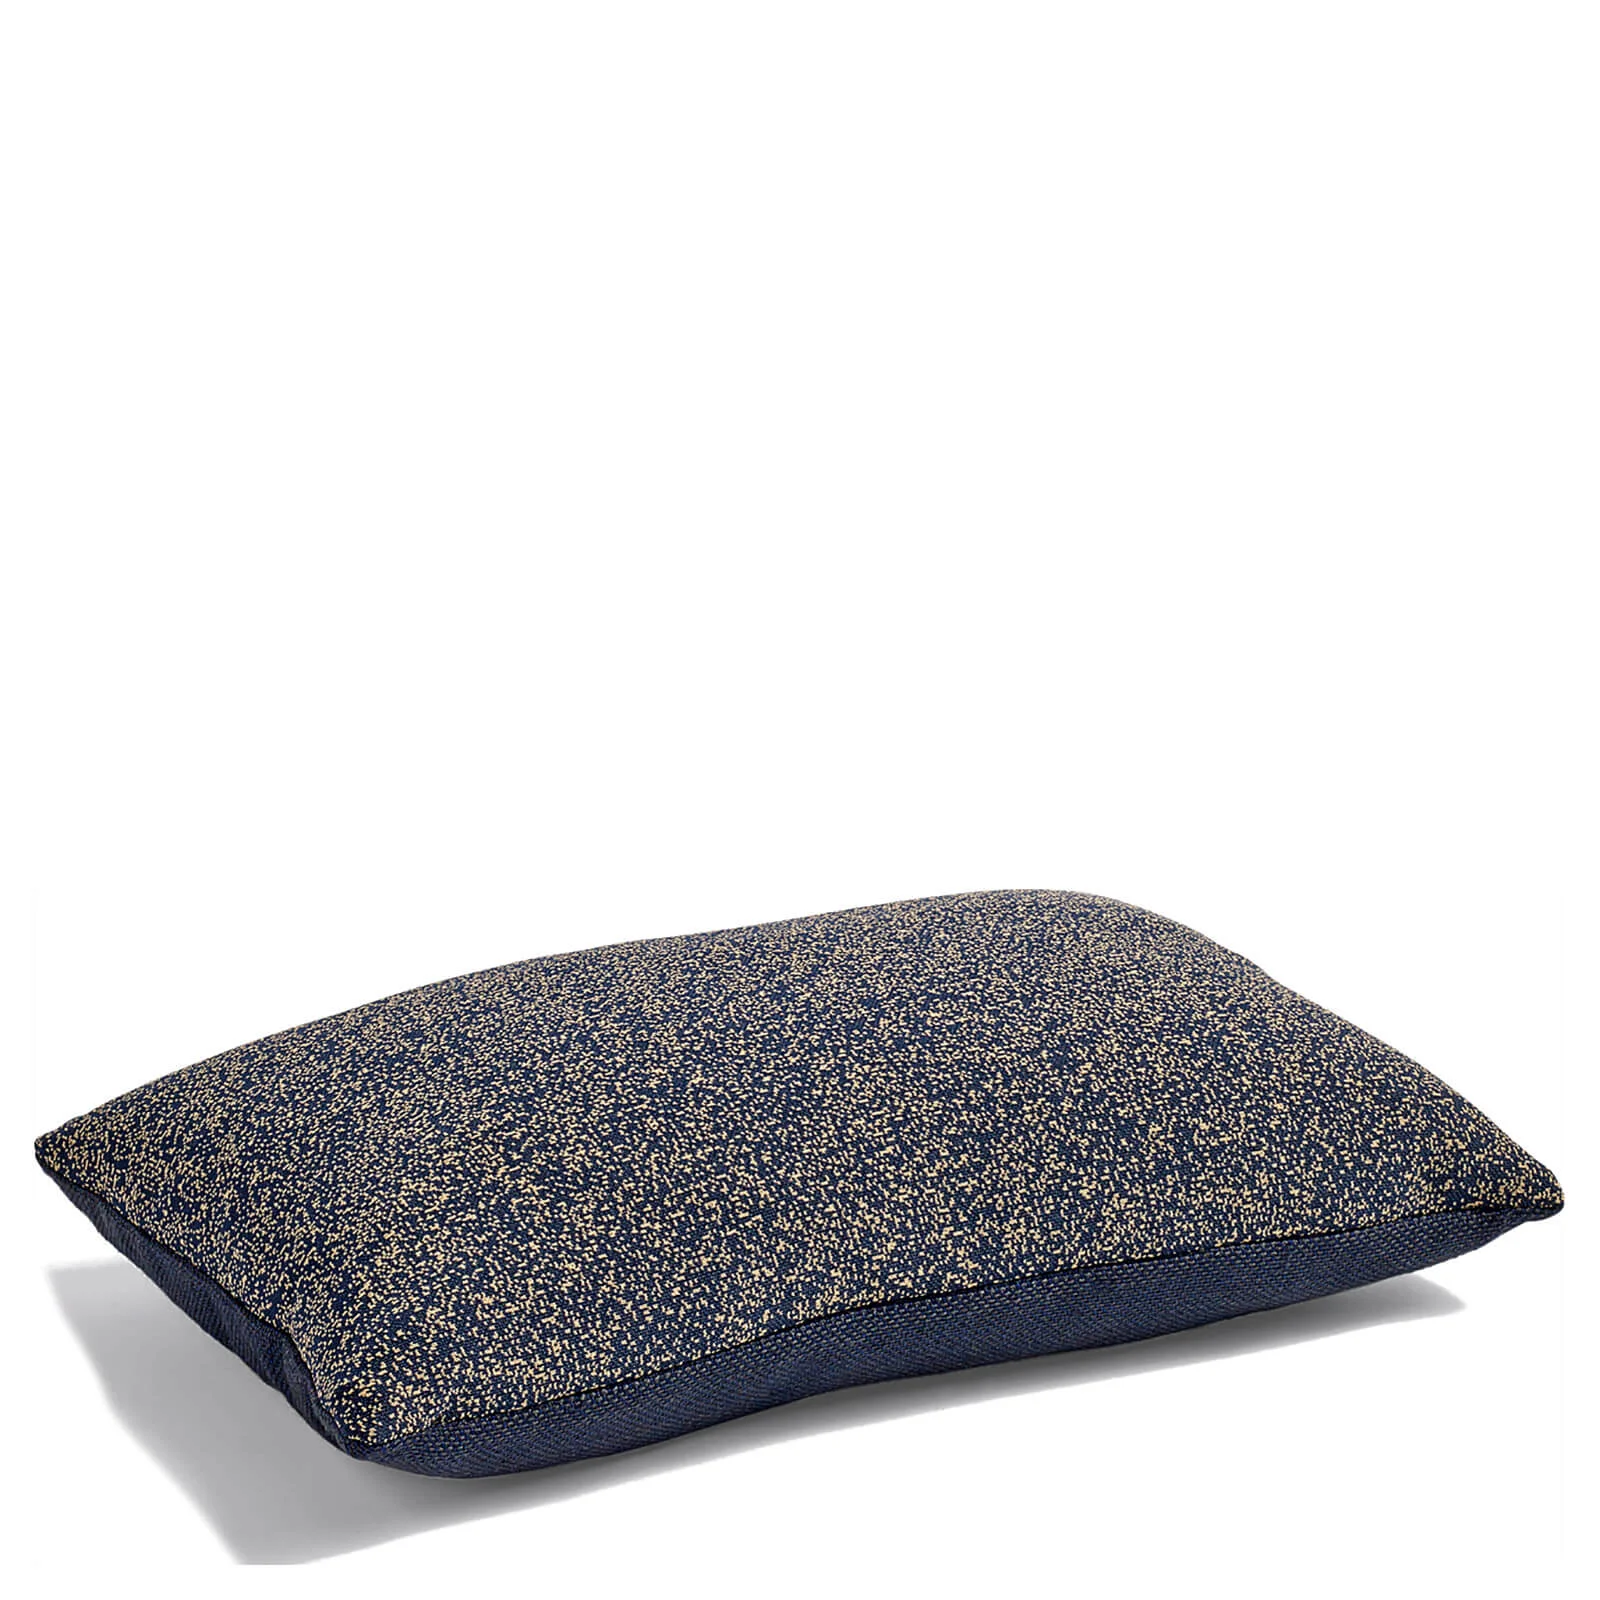 HAY Eclectic Collection Cushion - Starry Sky Image 1